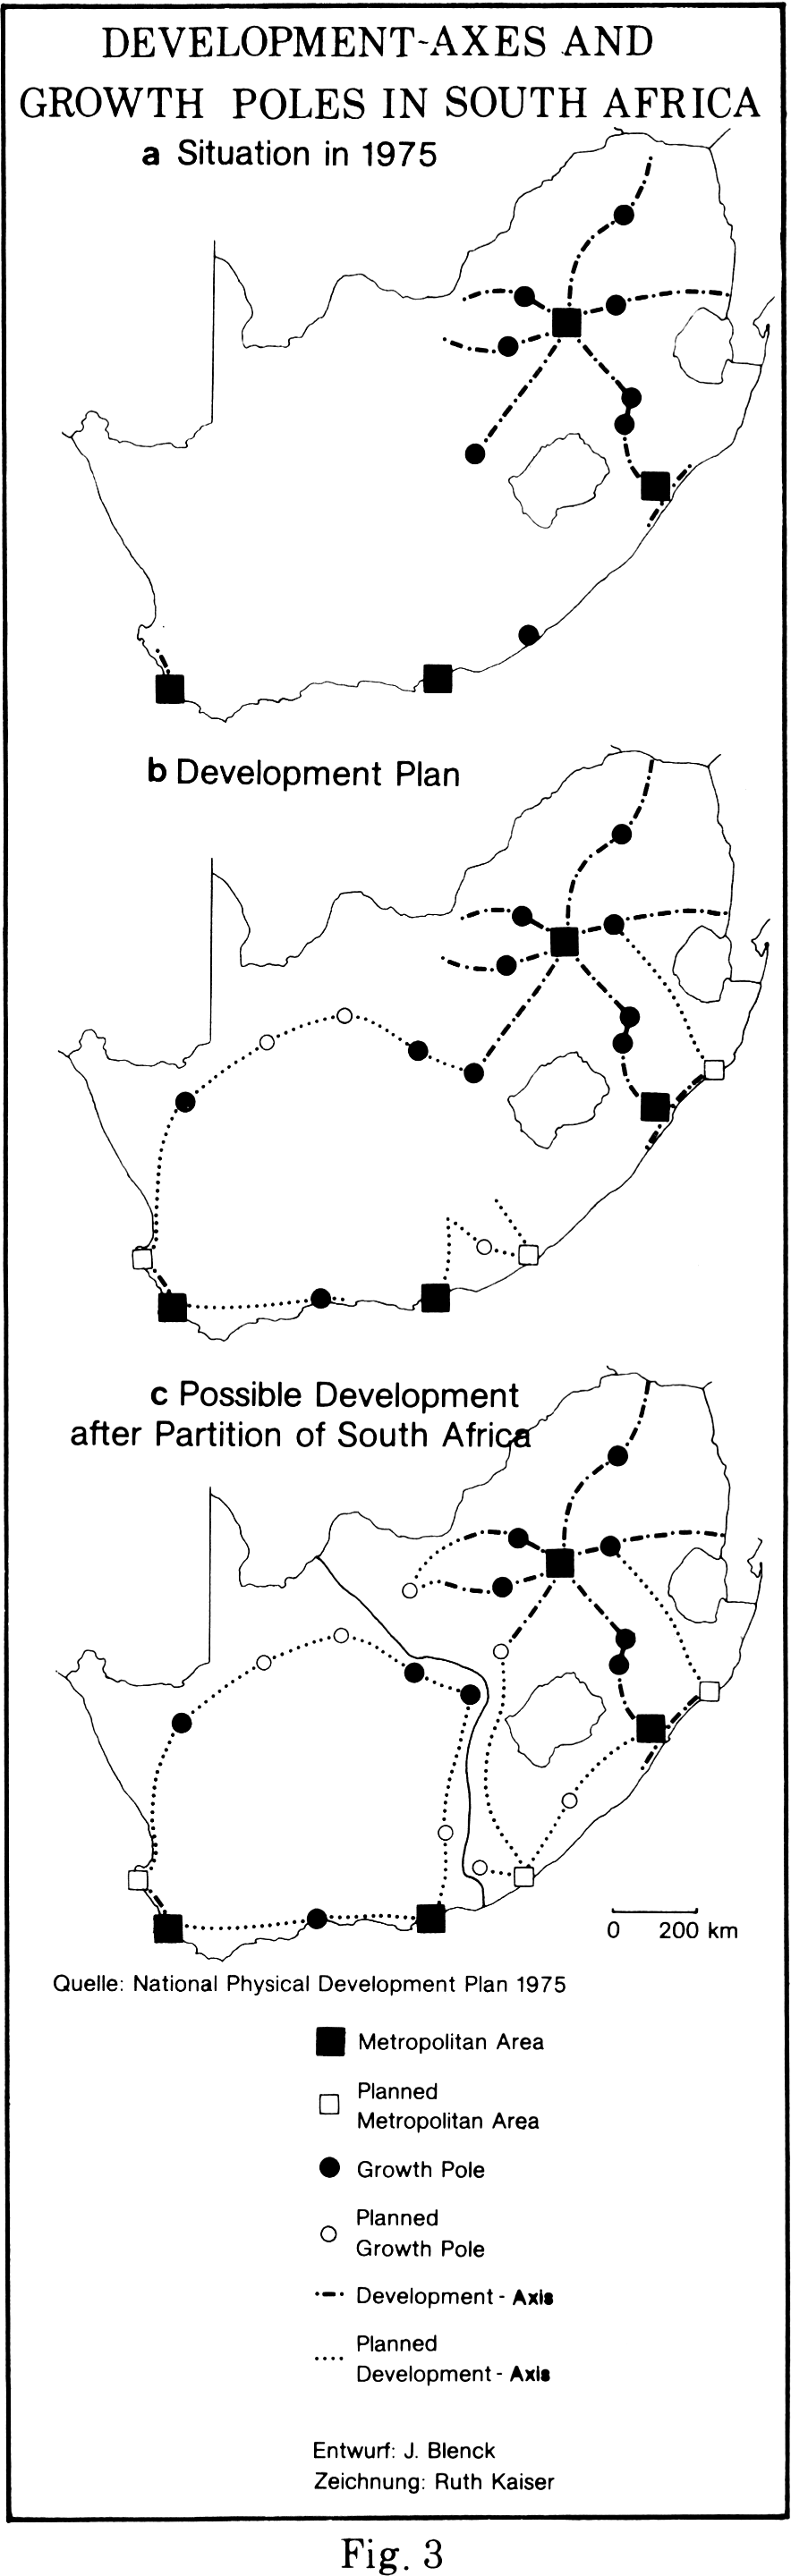 Fig. 3: Development-axes and growth poles in South Africa